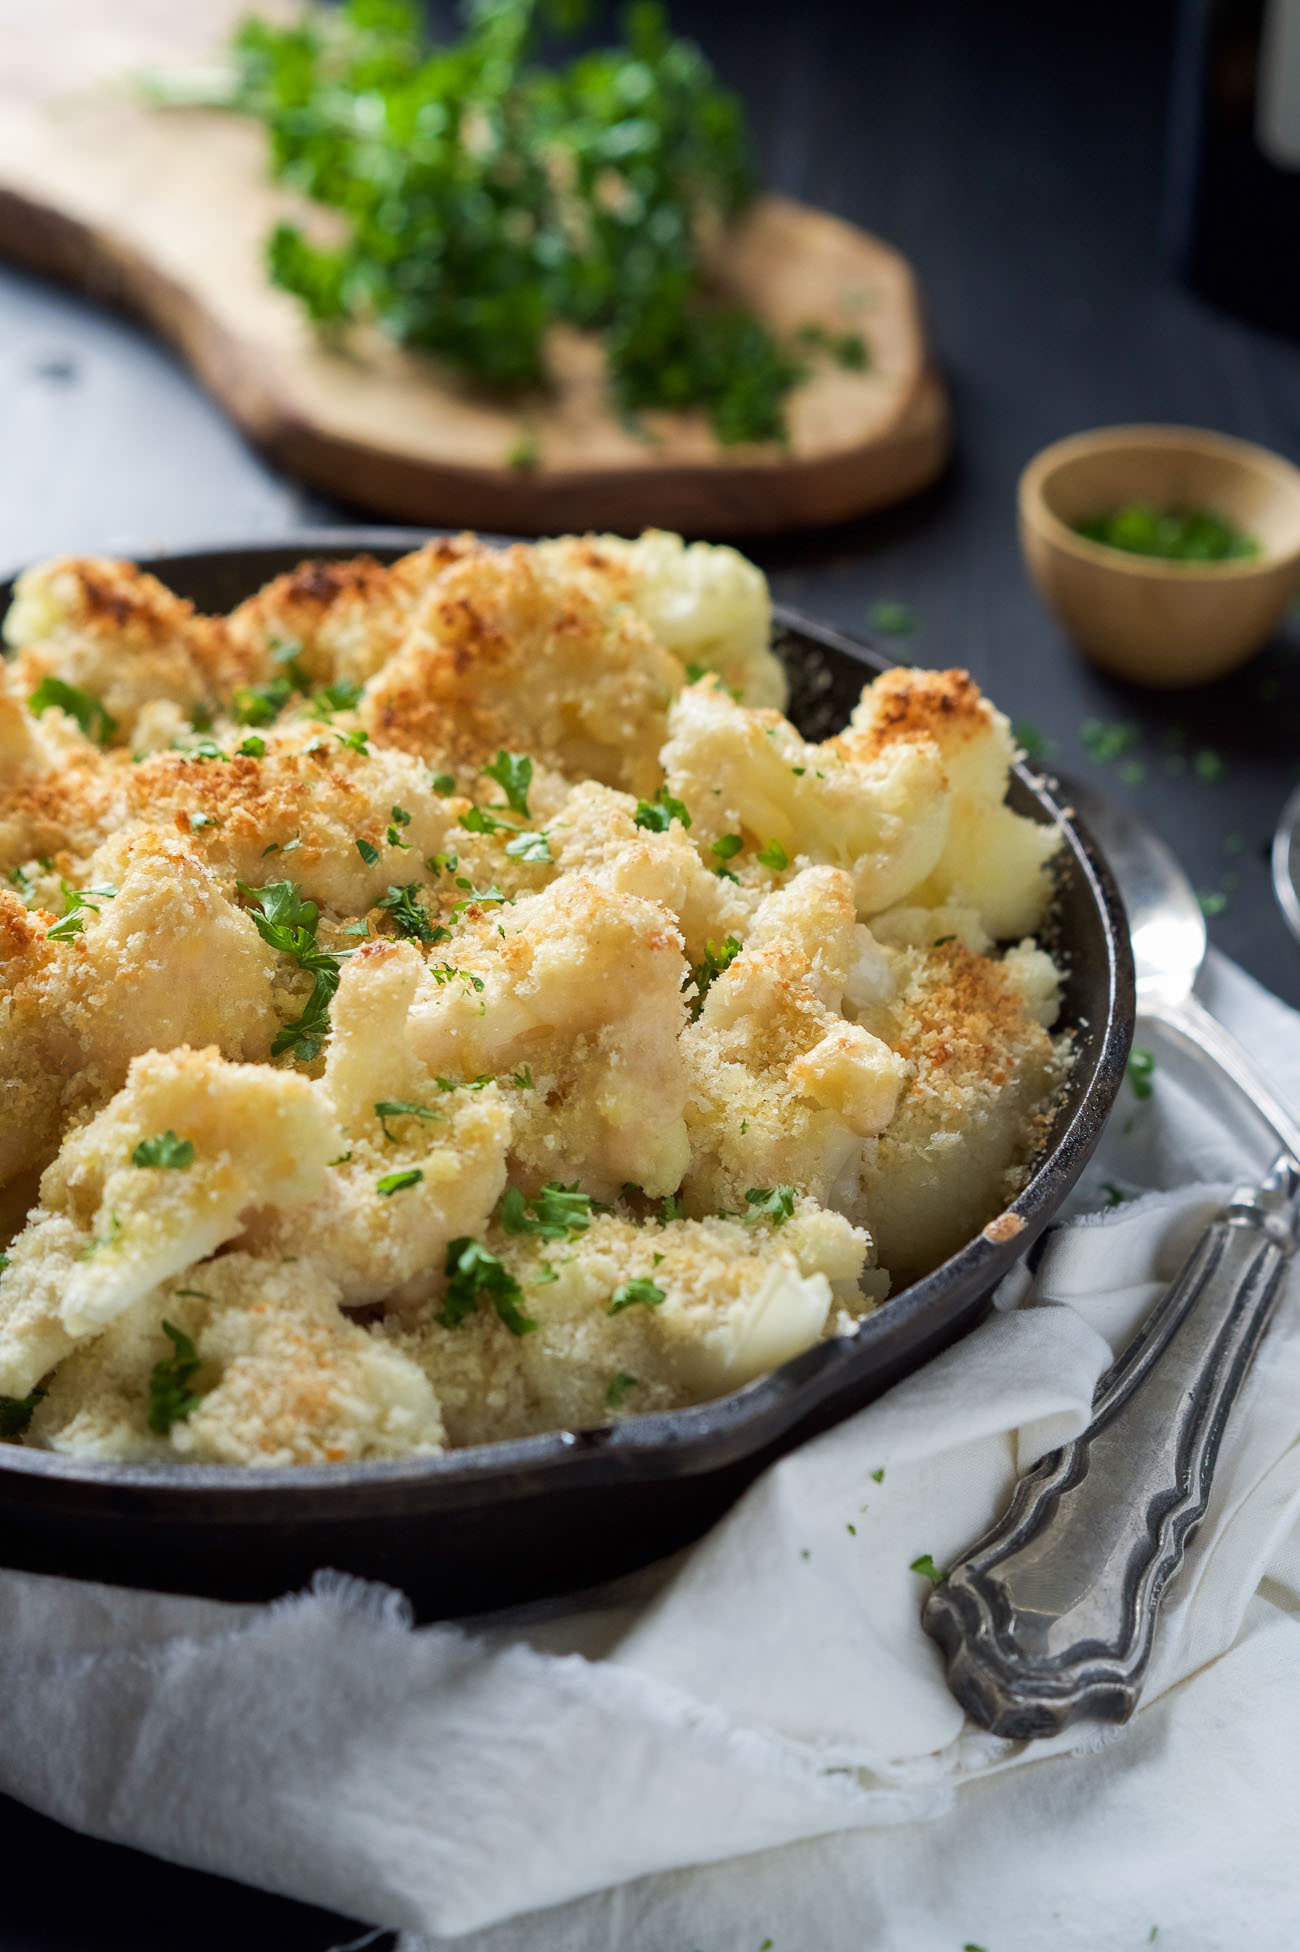 Garlic Gouda & Parmesan Cauliflower Au Gratin is the perfect side dish for your holiday table but easy enough for any weeknight dinner! Tender cauliflower blanketed in a double cheese sauce and crunchy panko topping!